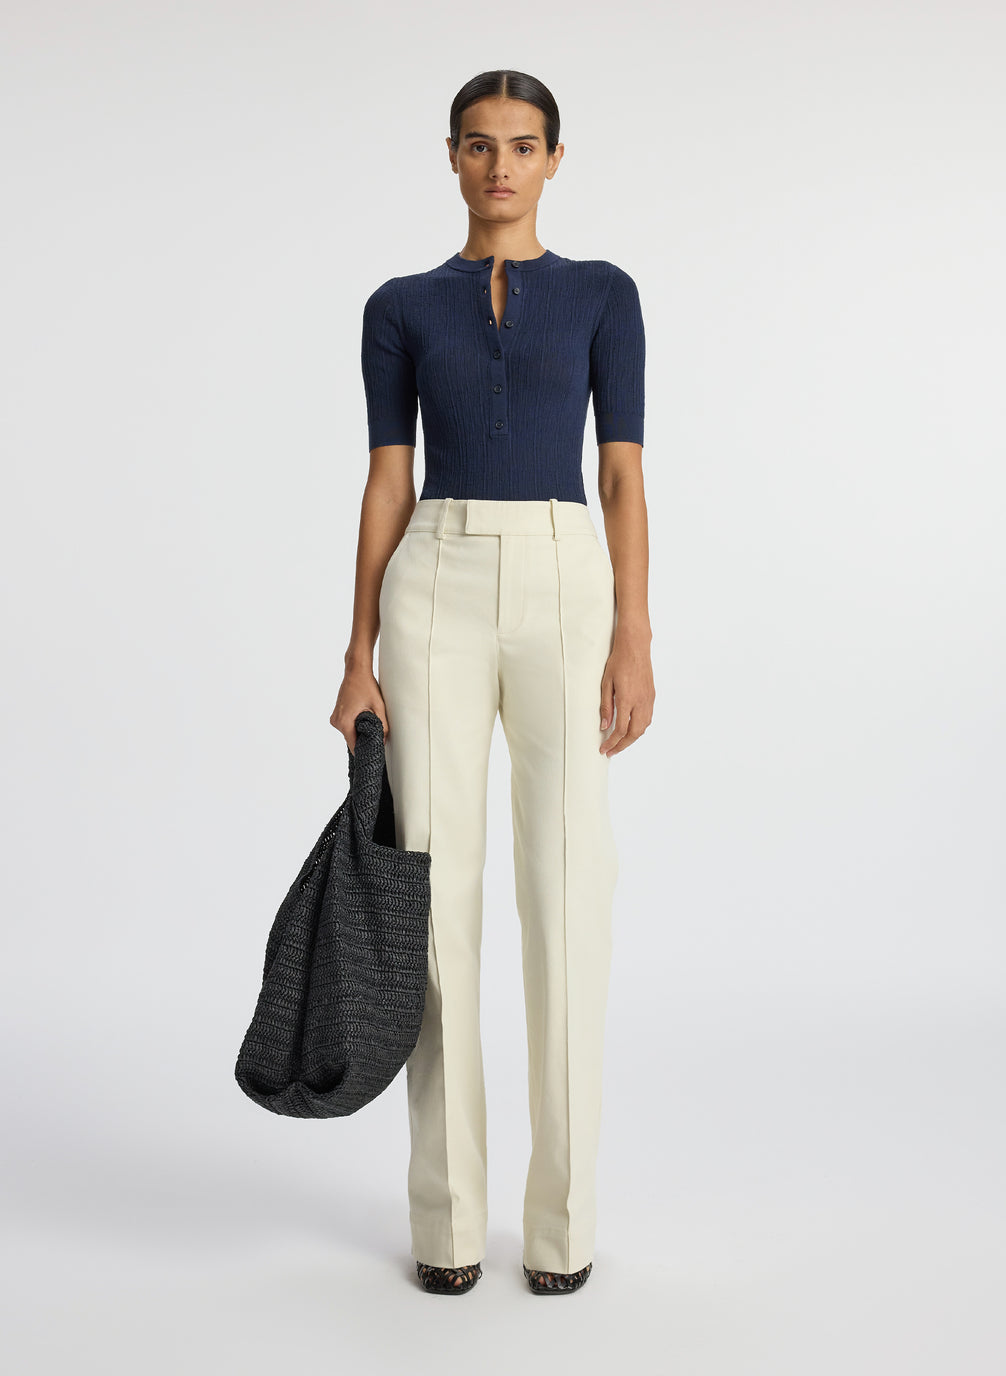 front view of woman wearing navy blue half sleeve button placket shirt and cream pants